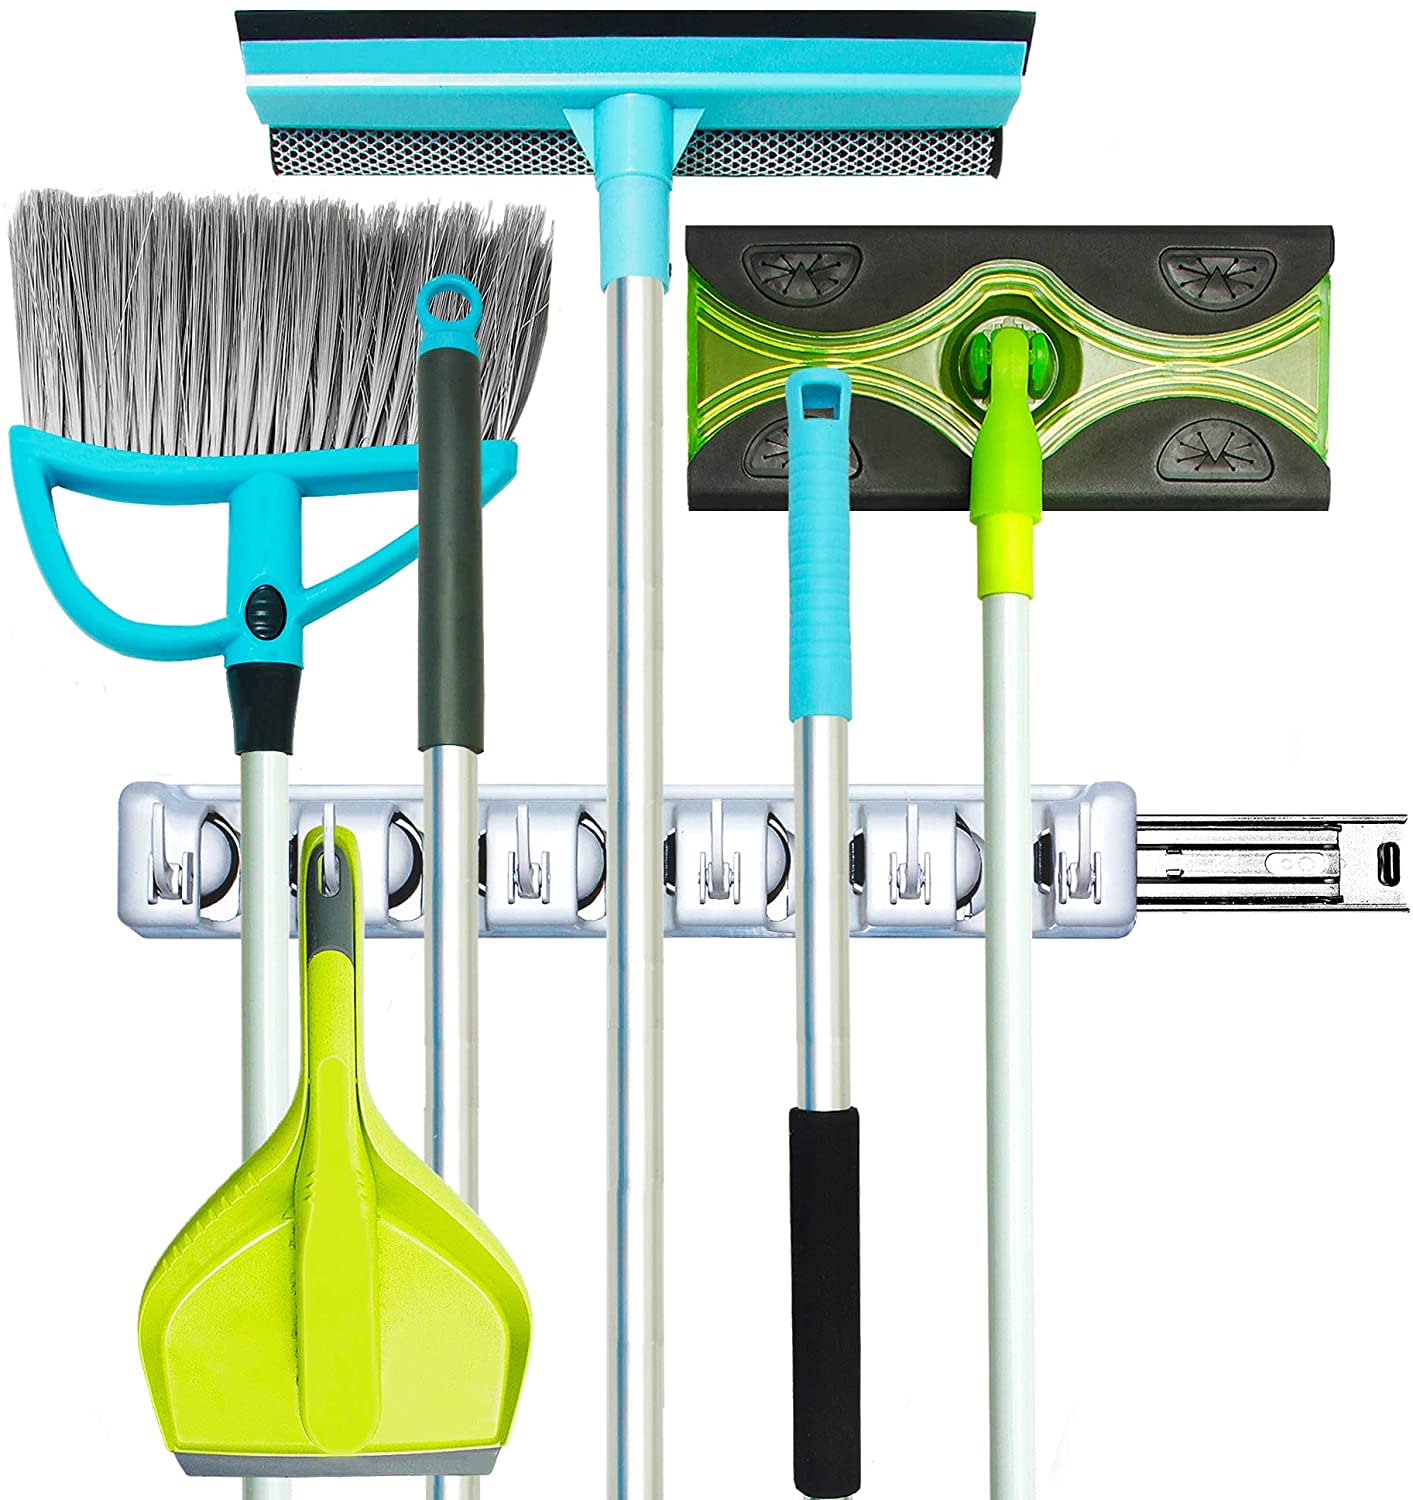 How To Store Mops And Brooms